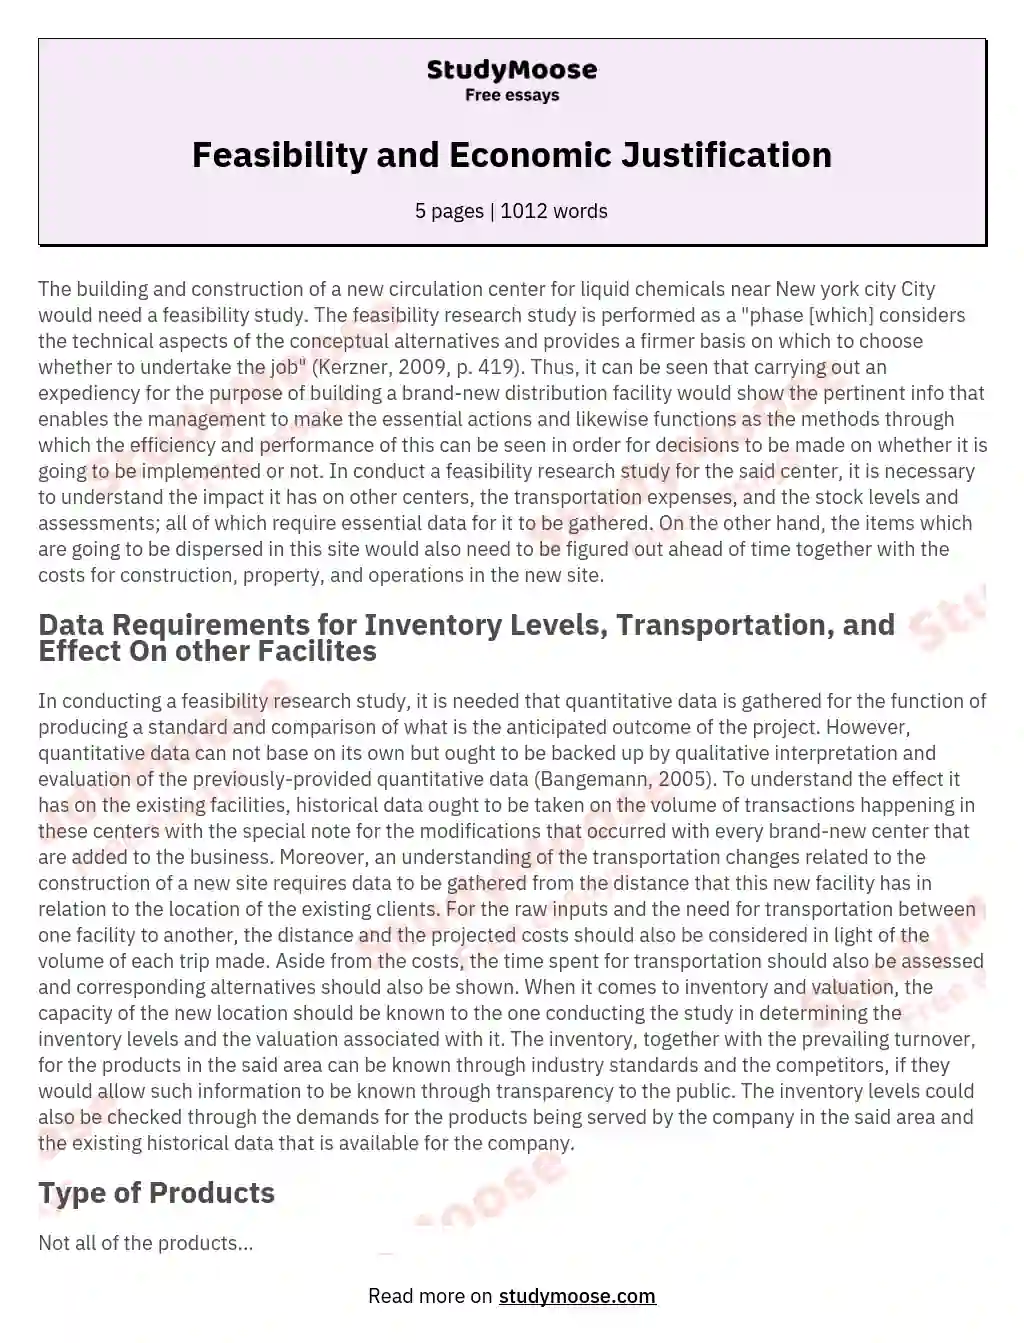 Feasibility and Economic Justification essay